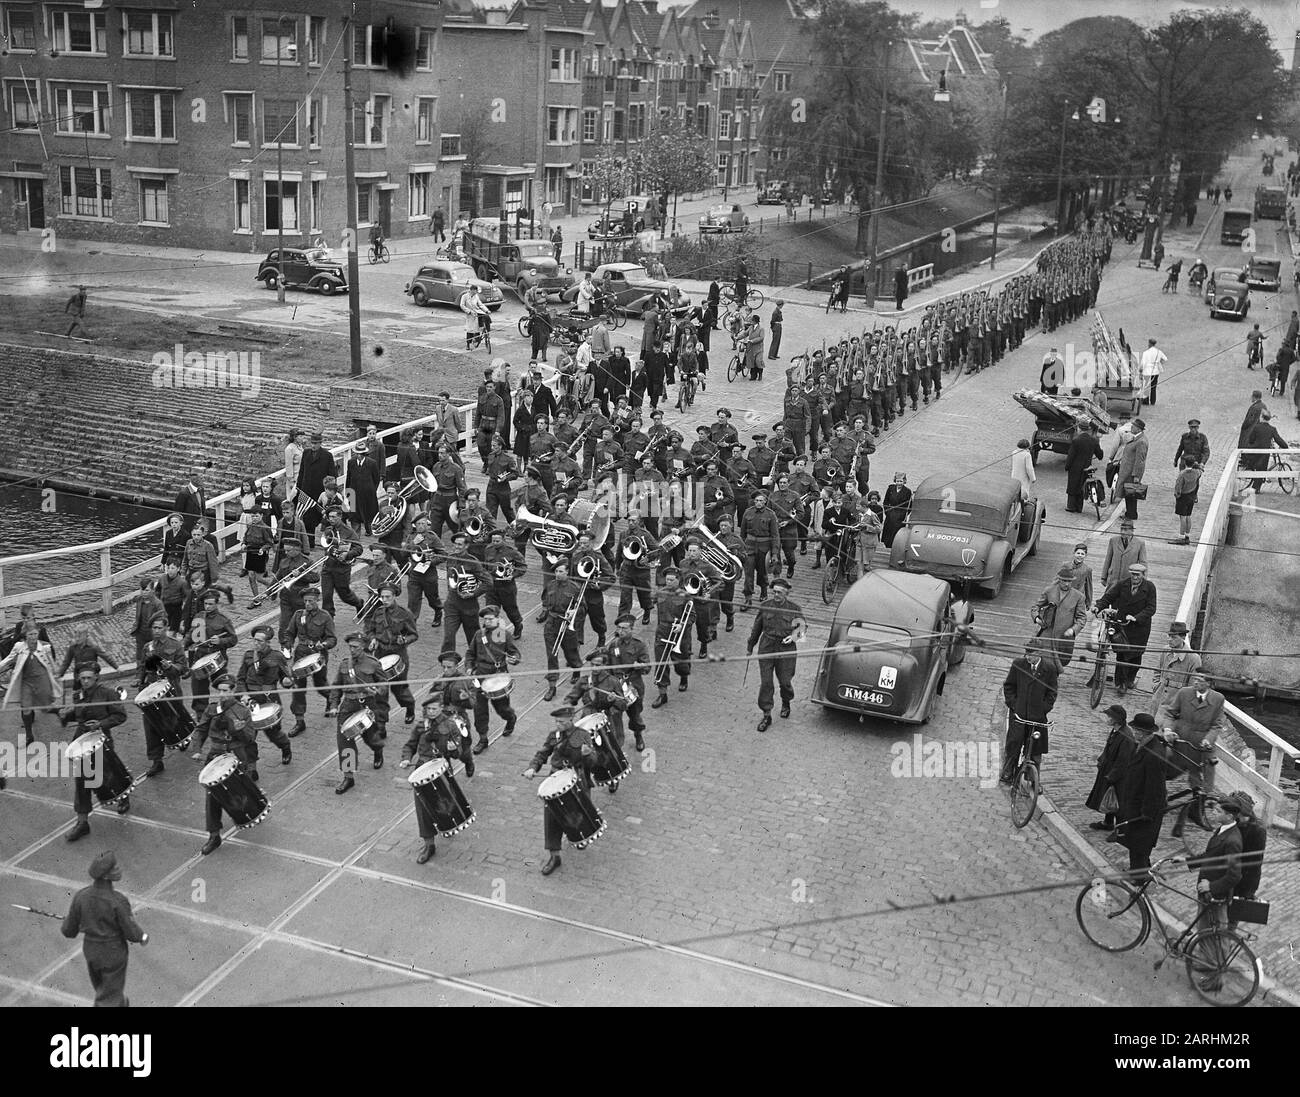 Inspection marches of the new generation Date: April 29, 1946 Stock Photo